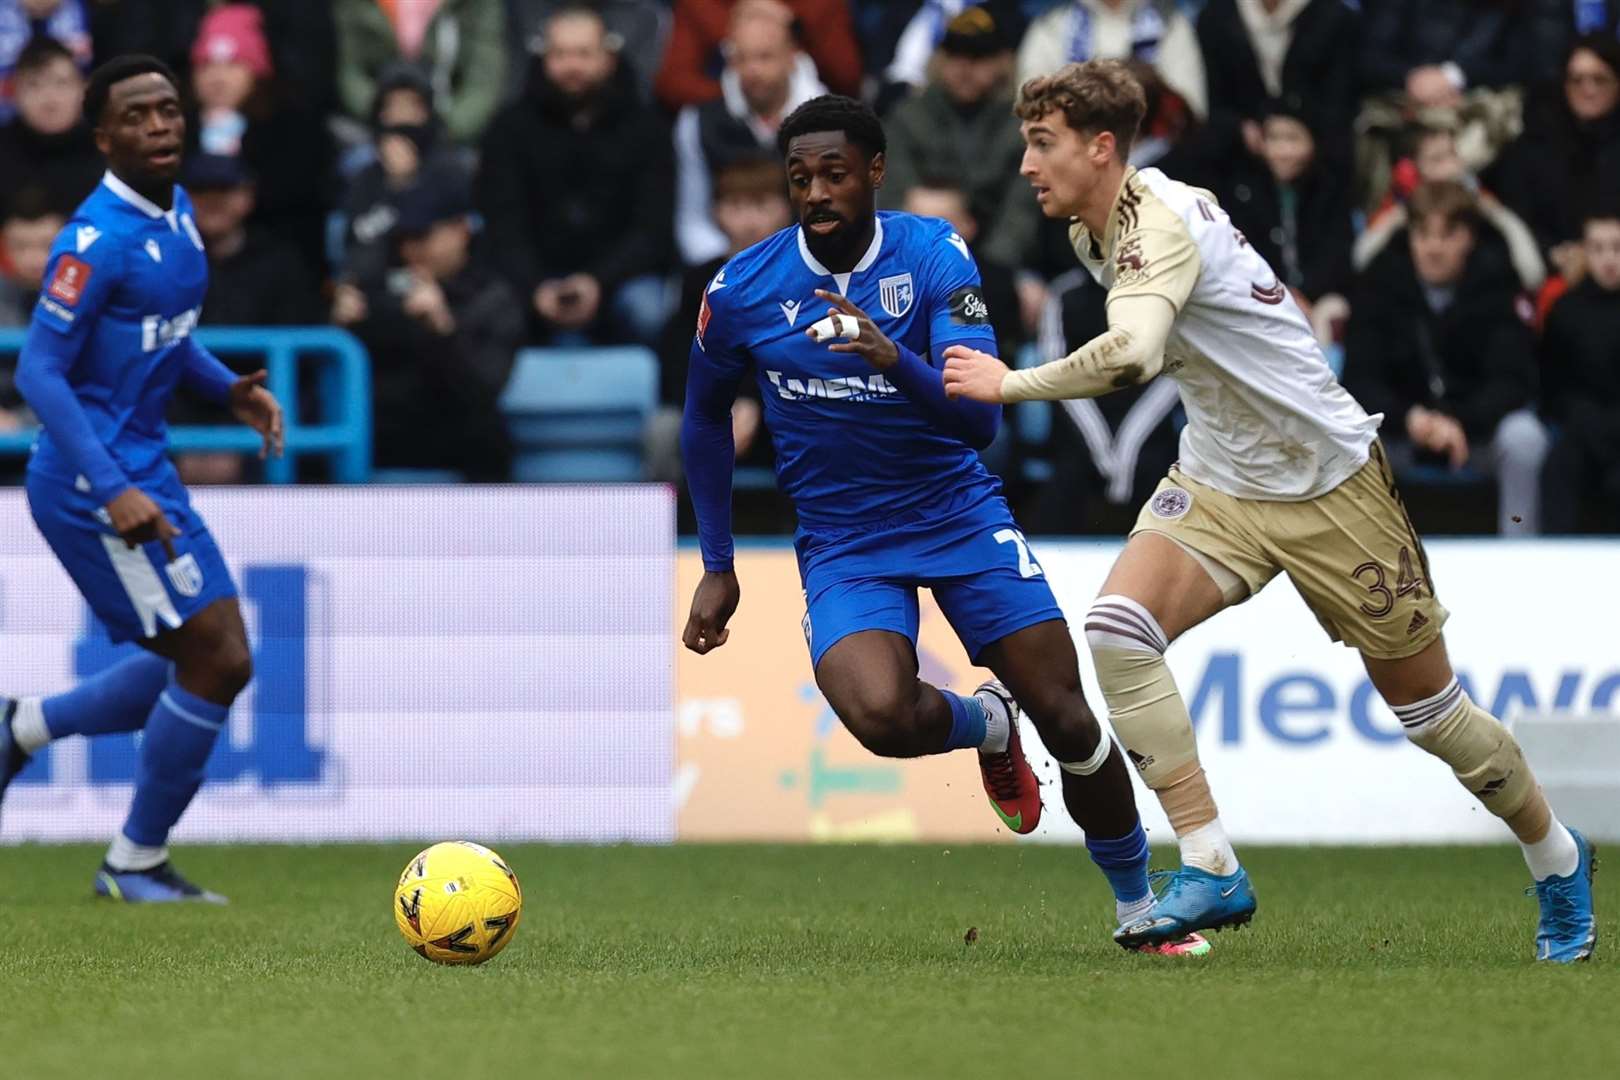 Hakeeb Adelakun hasn't been in Gillingham's matchday squad for the last four matches